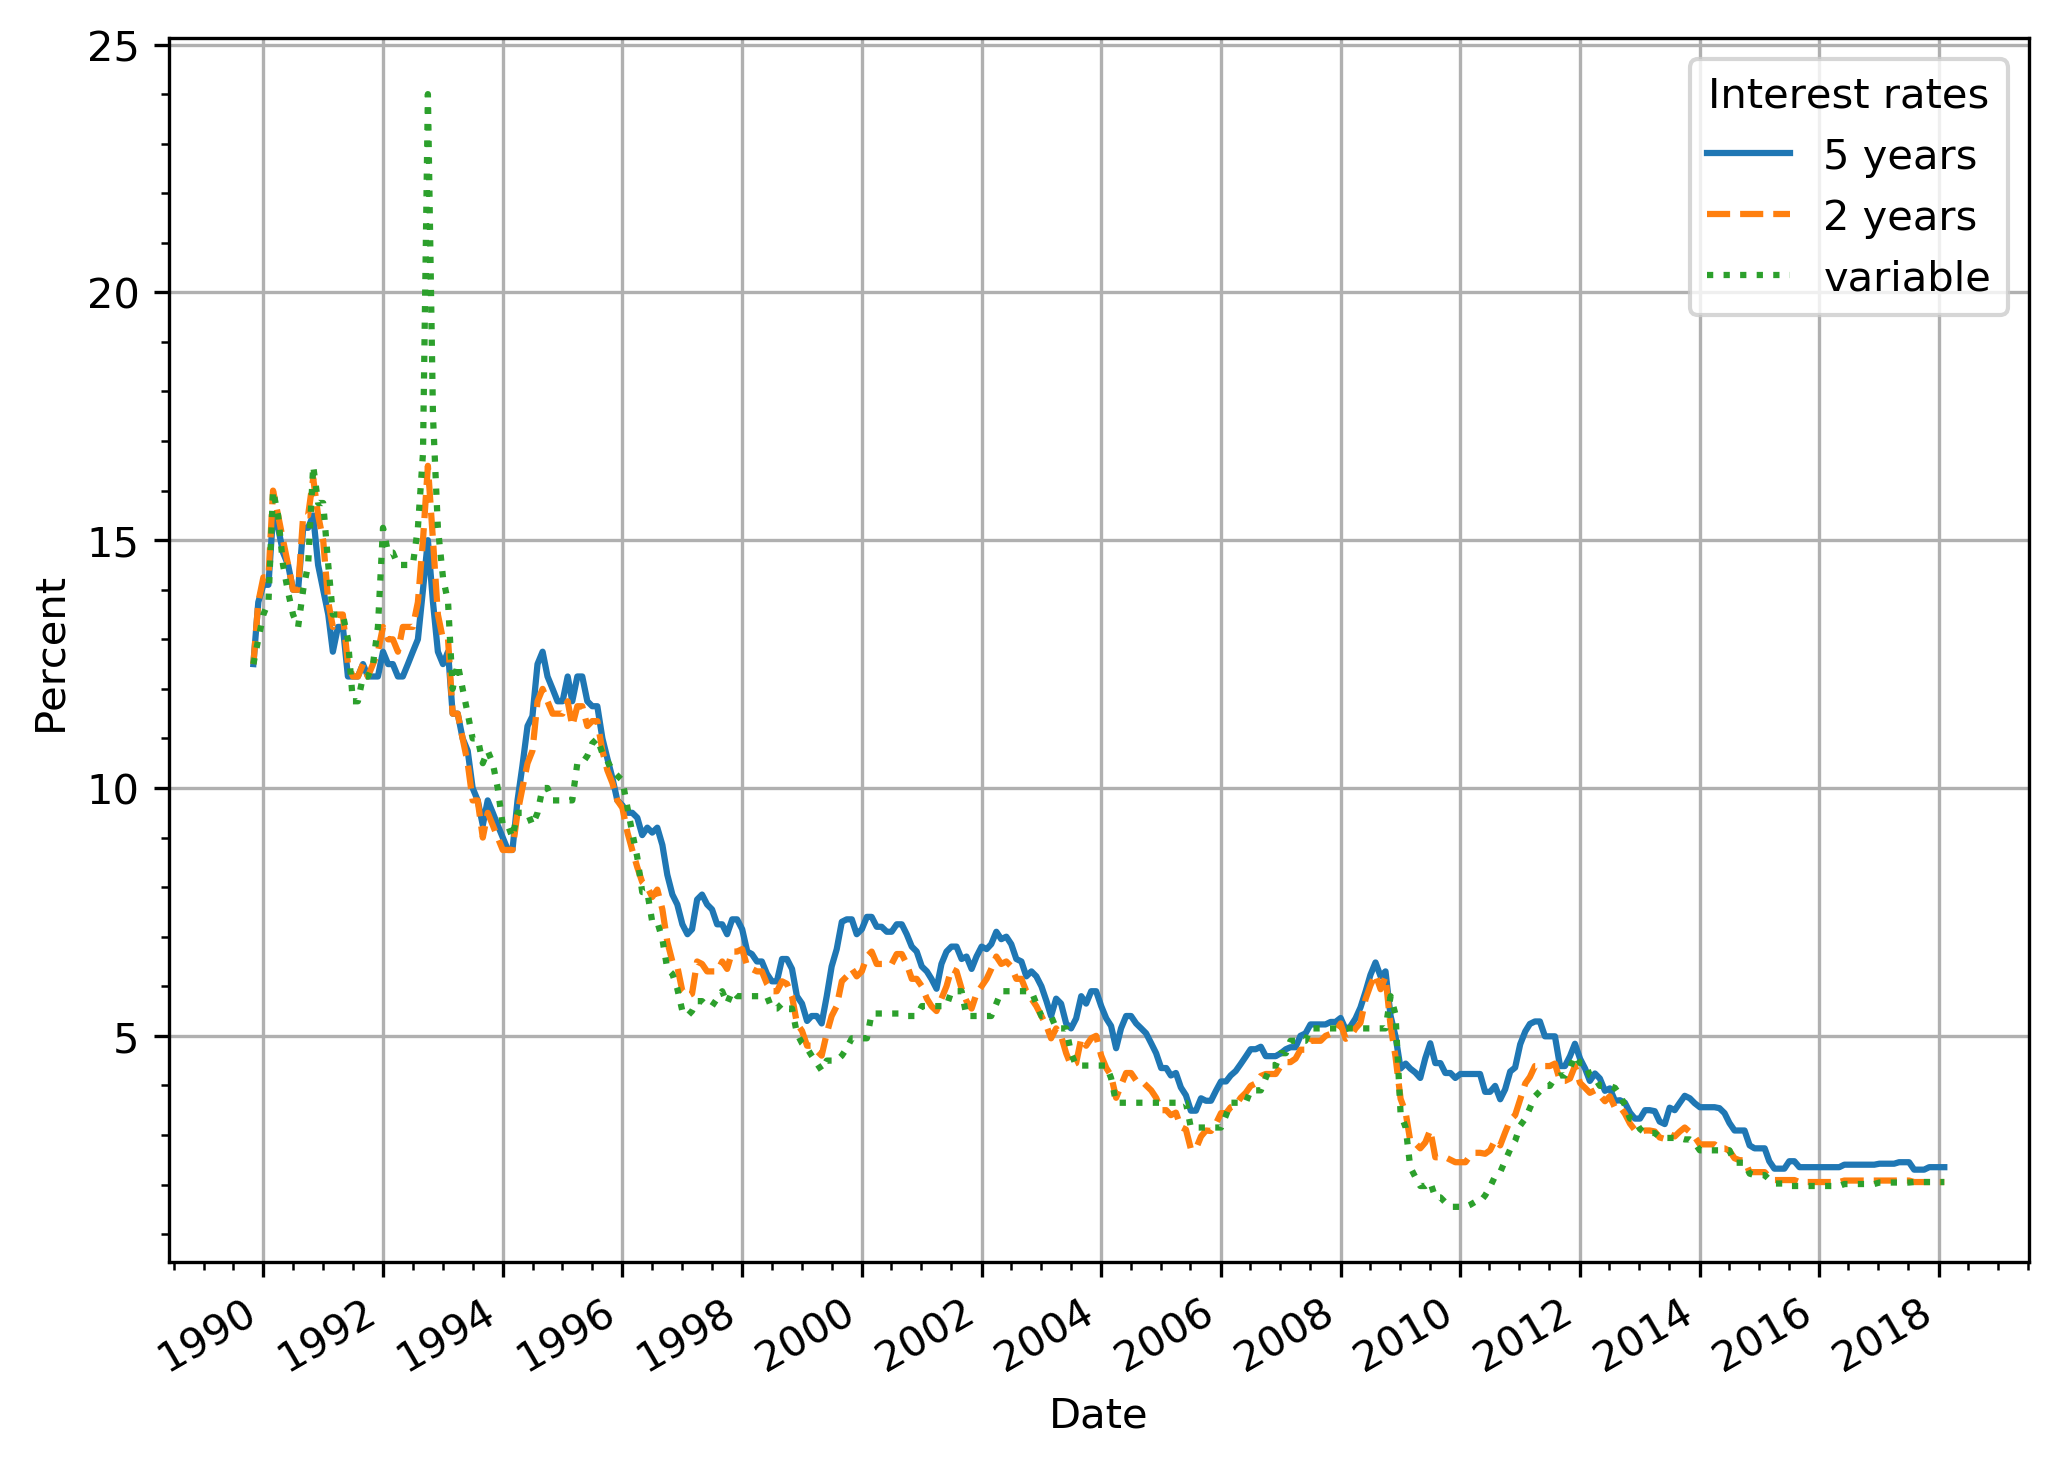 Interest rates over time